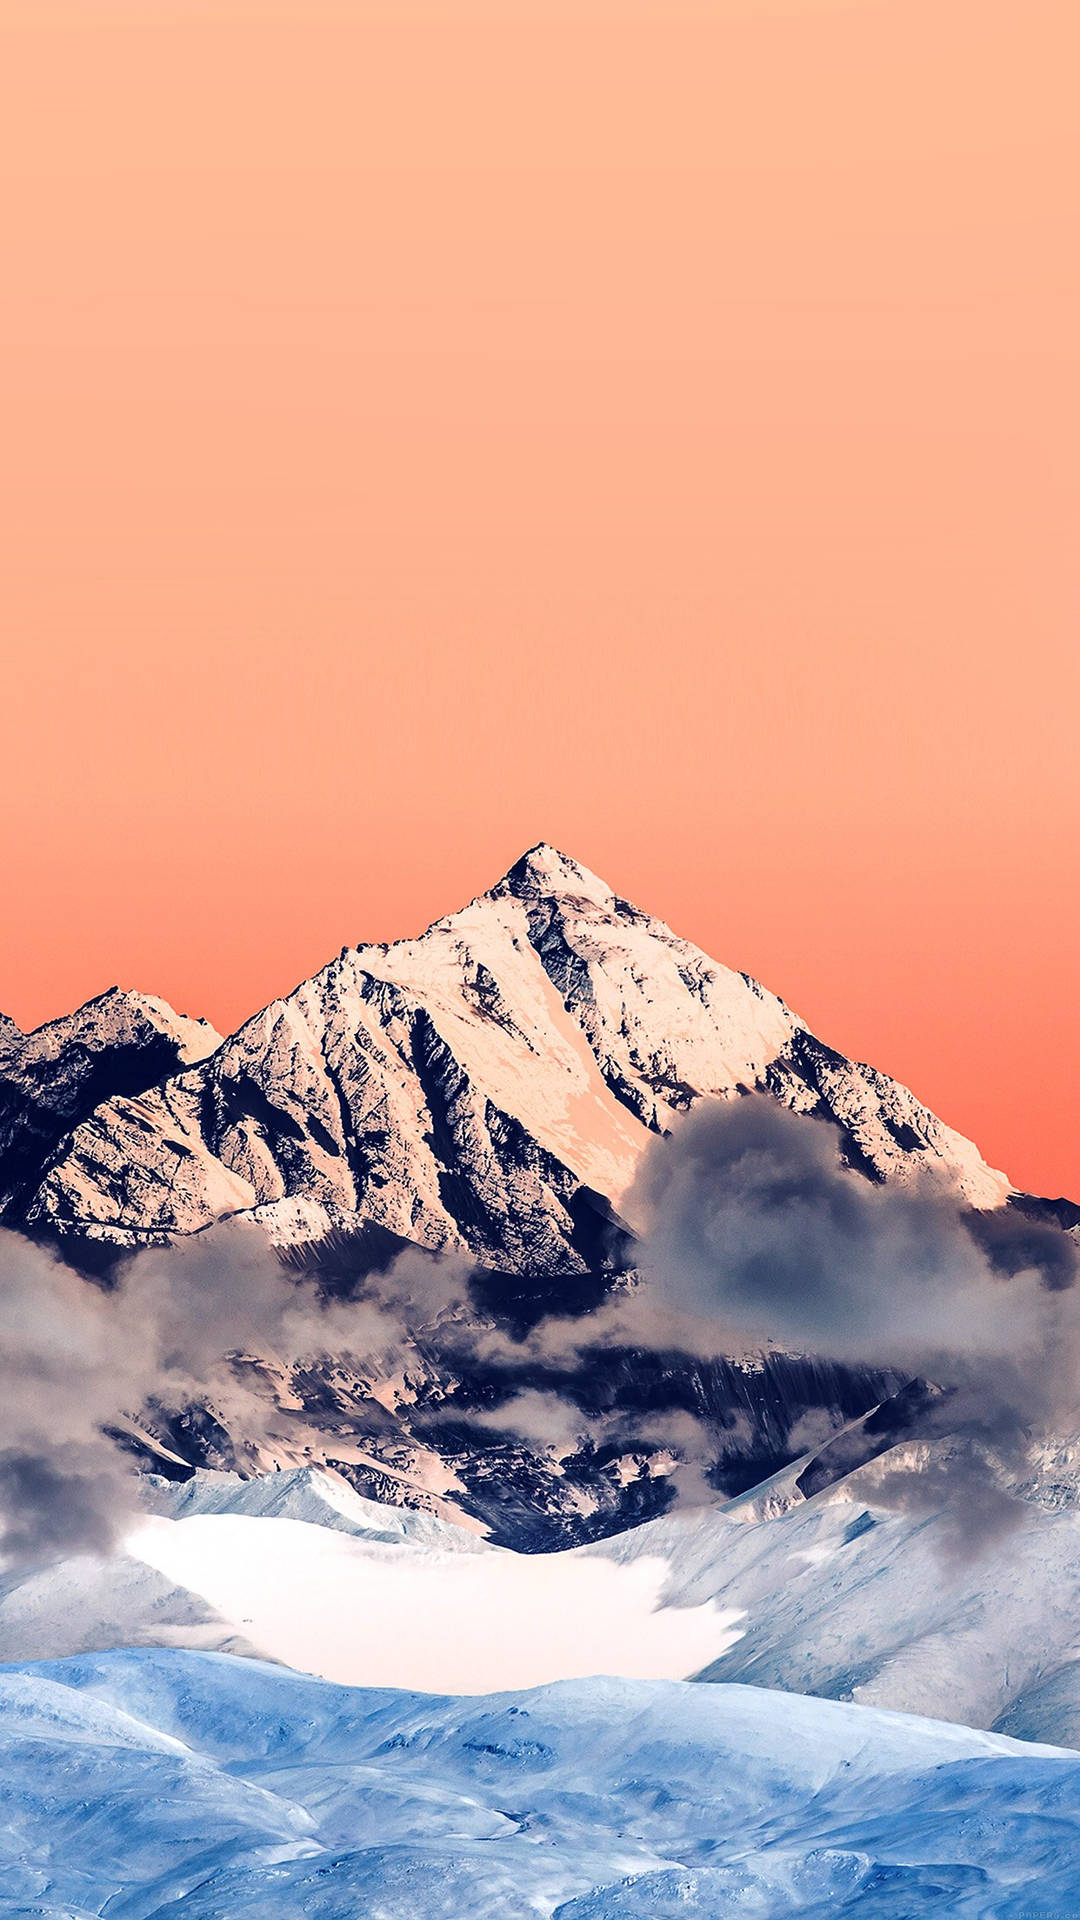 Snowy Moutain And Orange Sky Smartphone Background Wallpaper